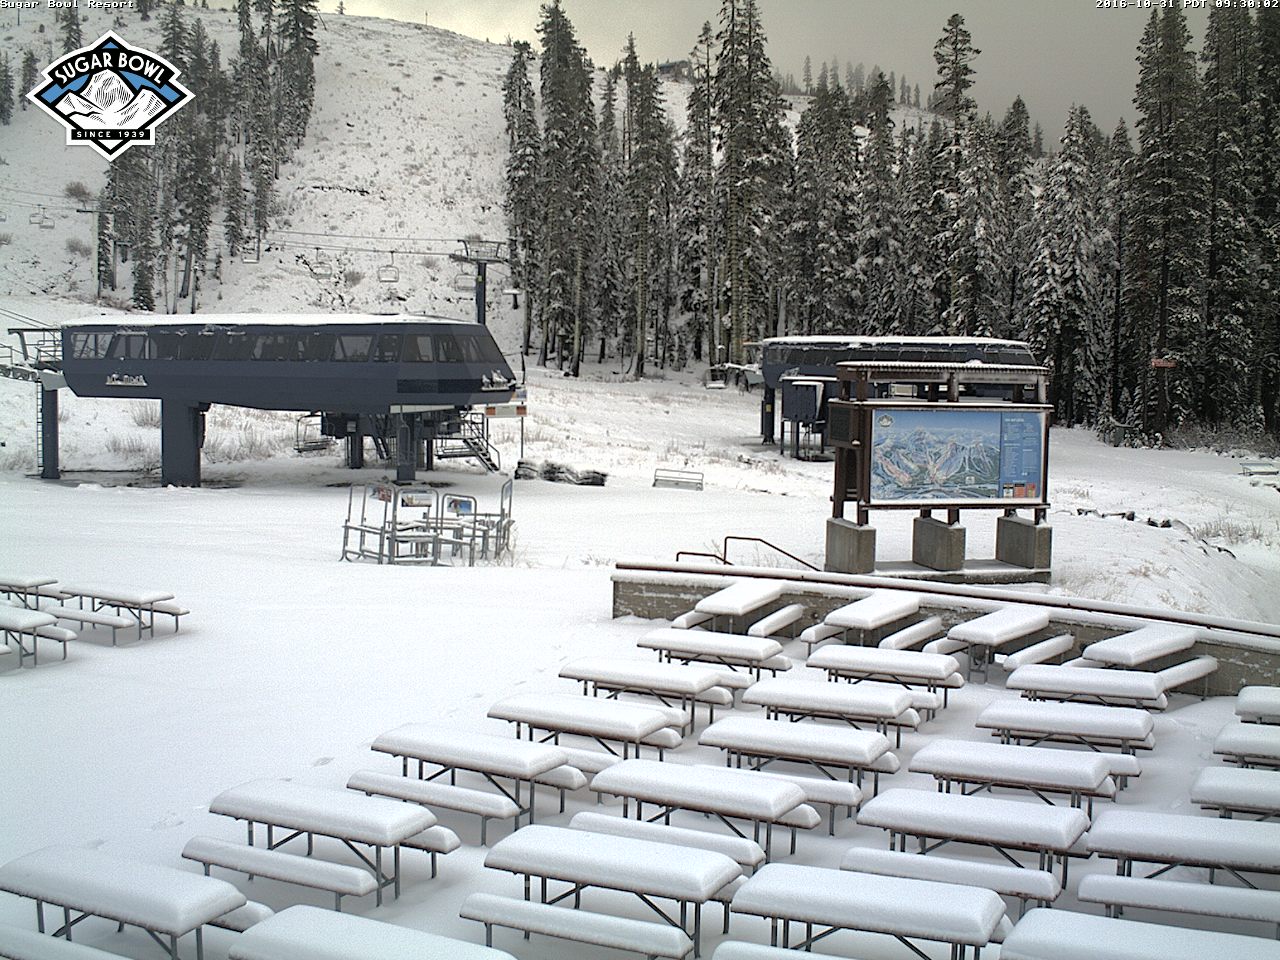 Snowfall Totals in California Today + Photo Tour | Up to 18" of New